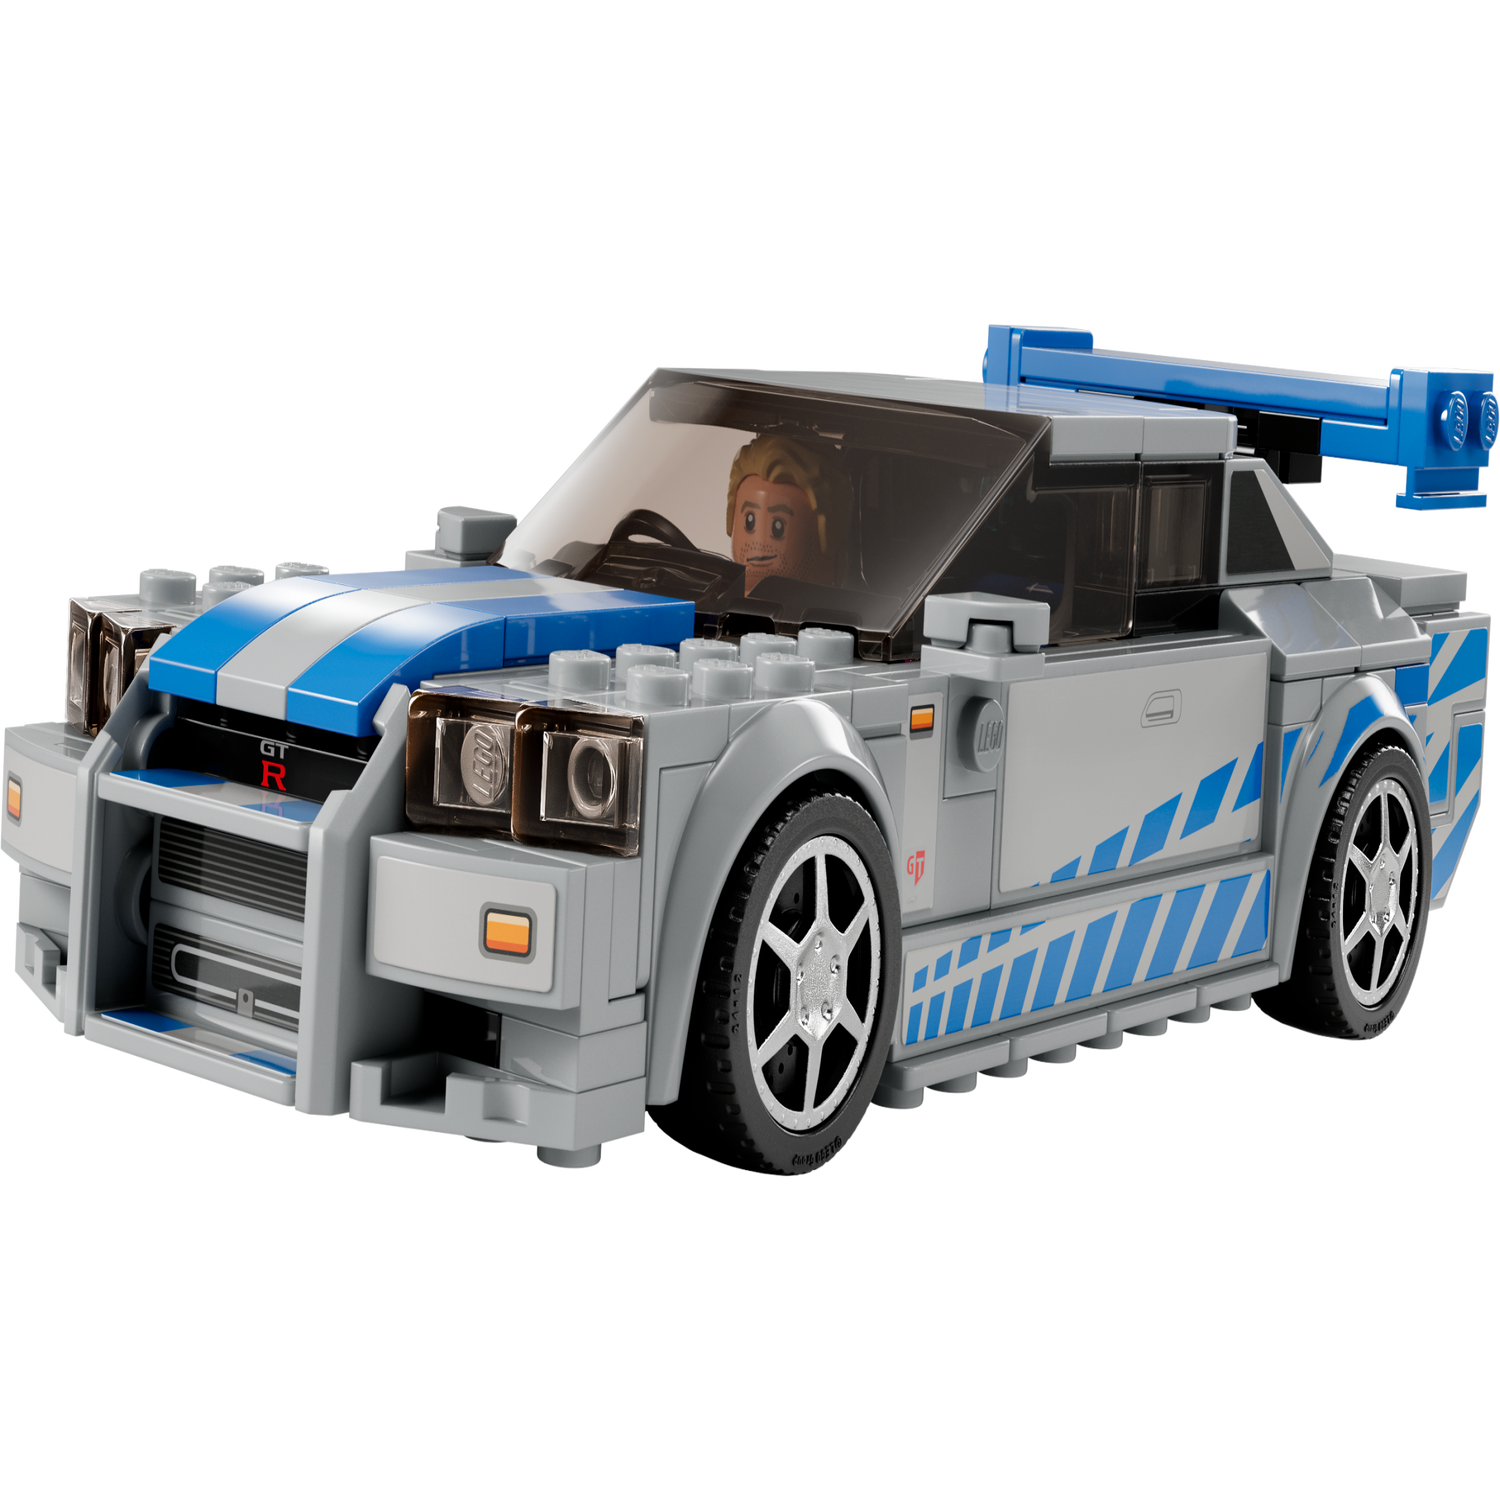 Nissan GT-R R34 Lego Set Coming—including a Brian O'Conner Minifig